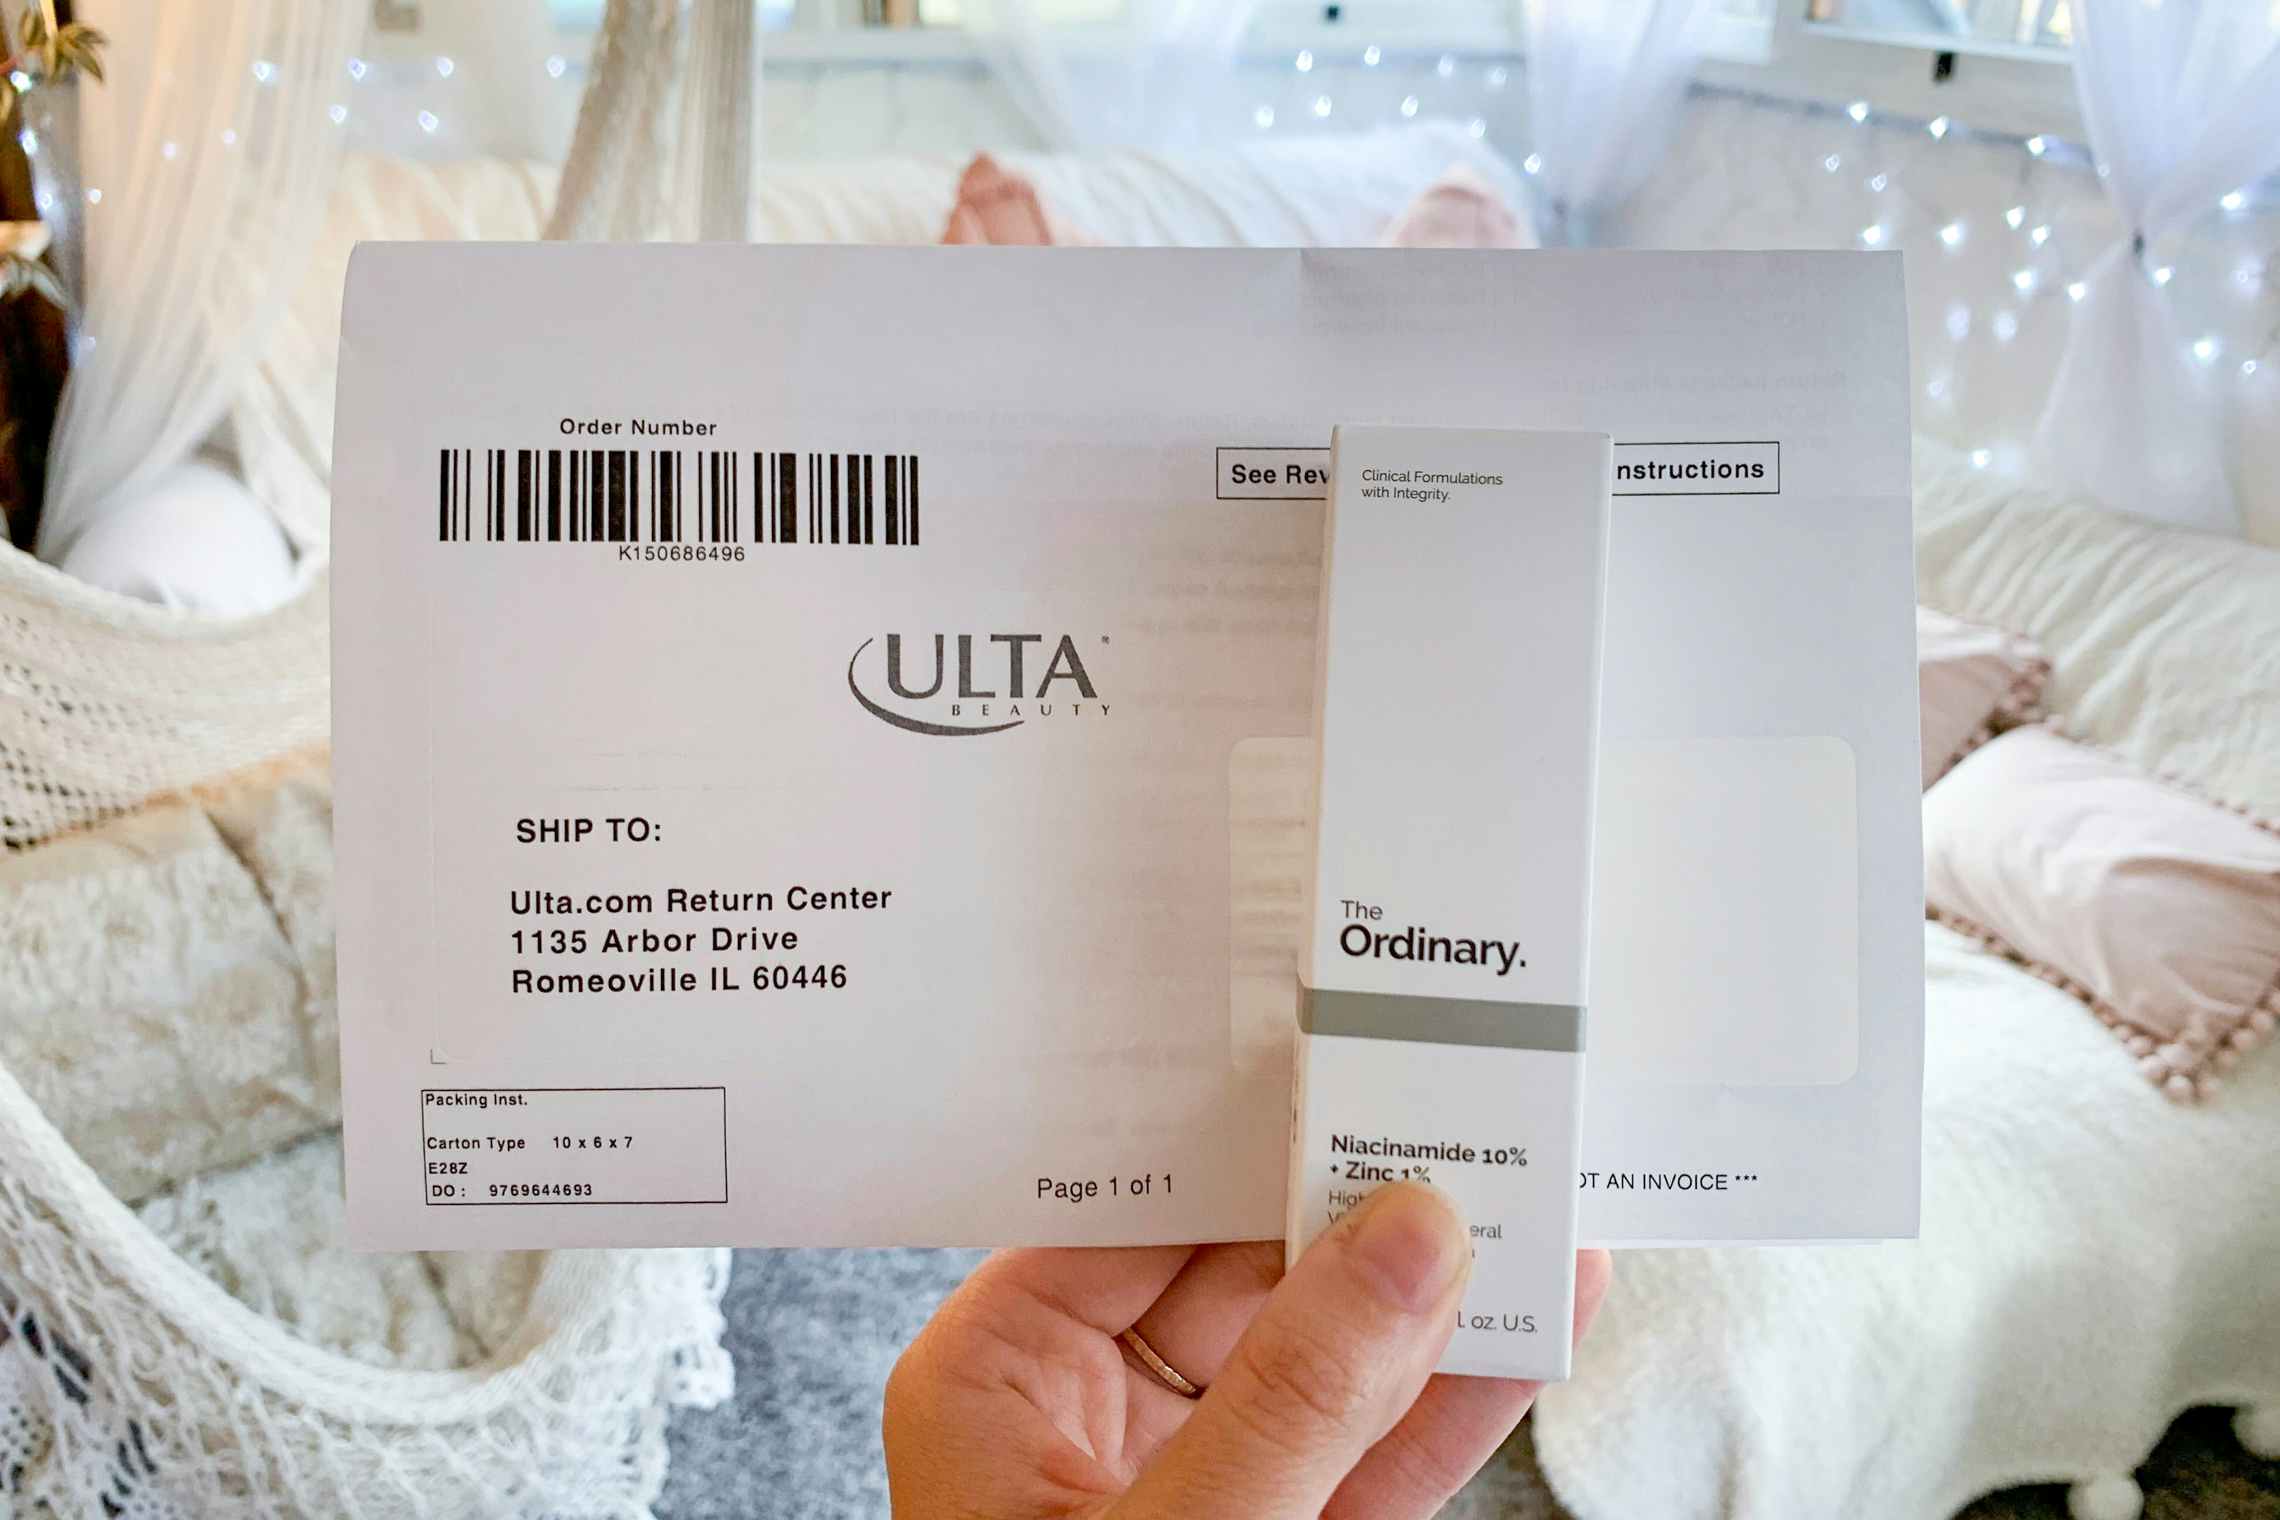 The ordinary skin care product and an online Ulta order receipt.